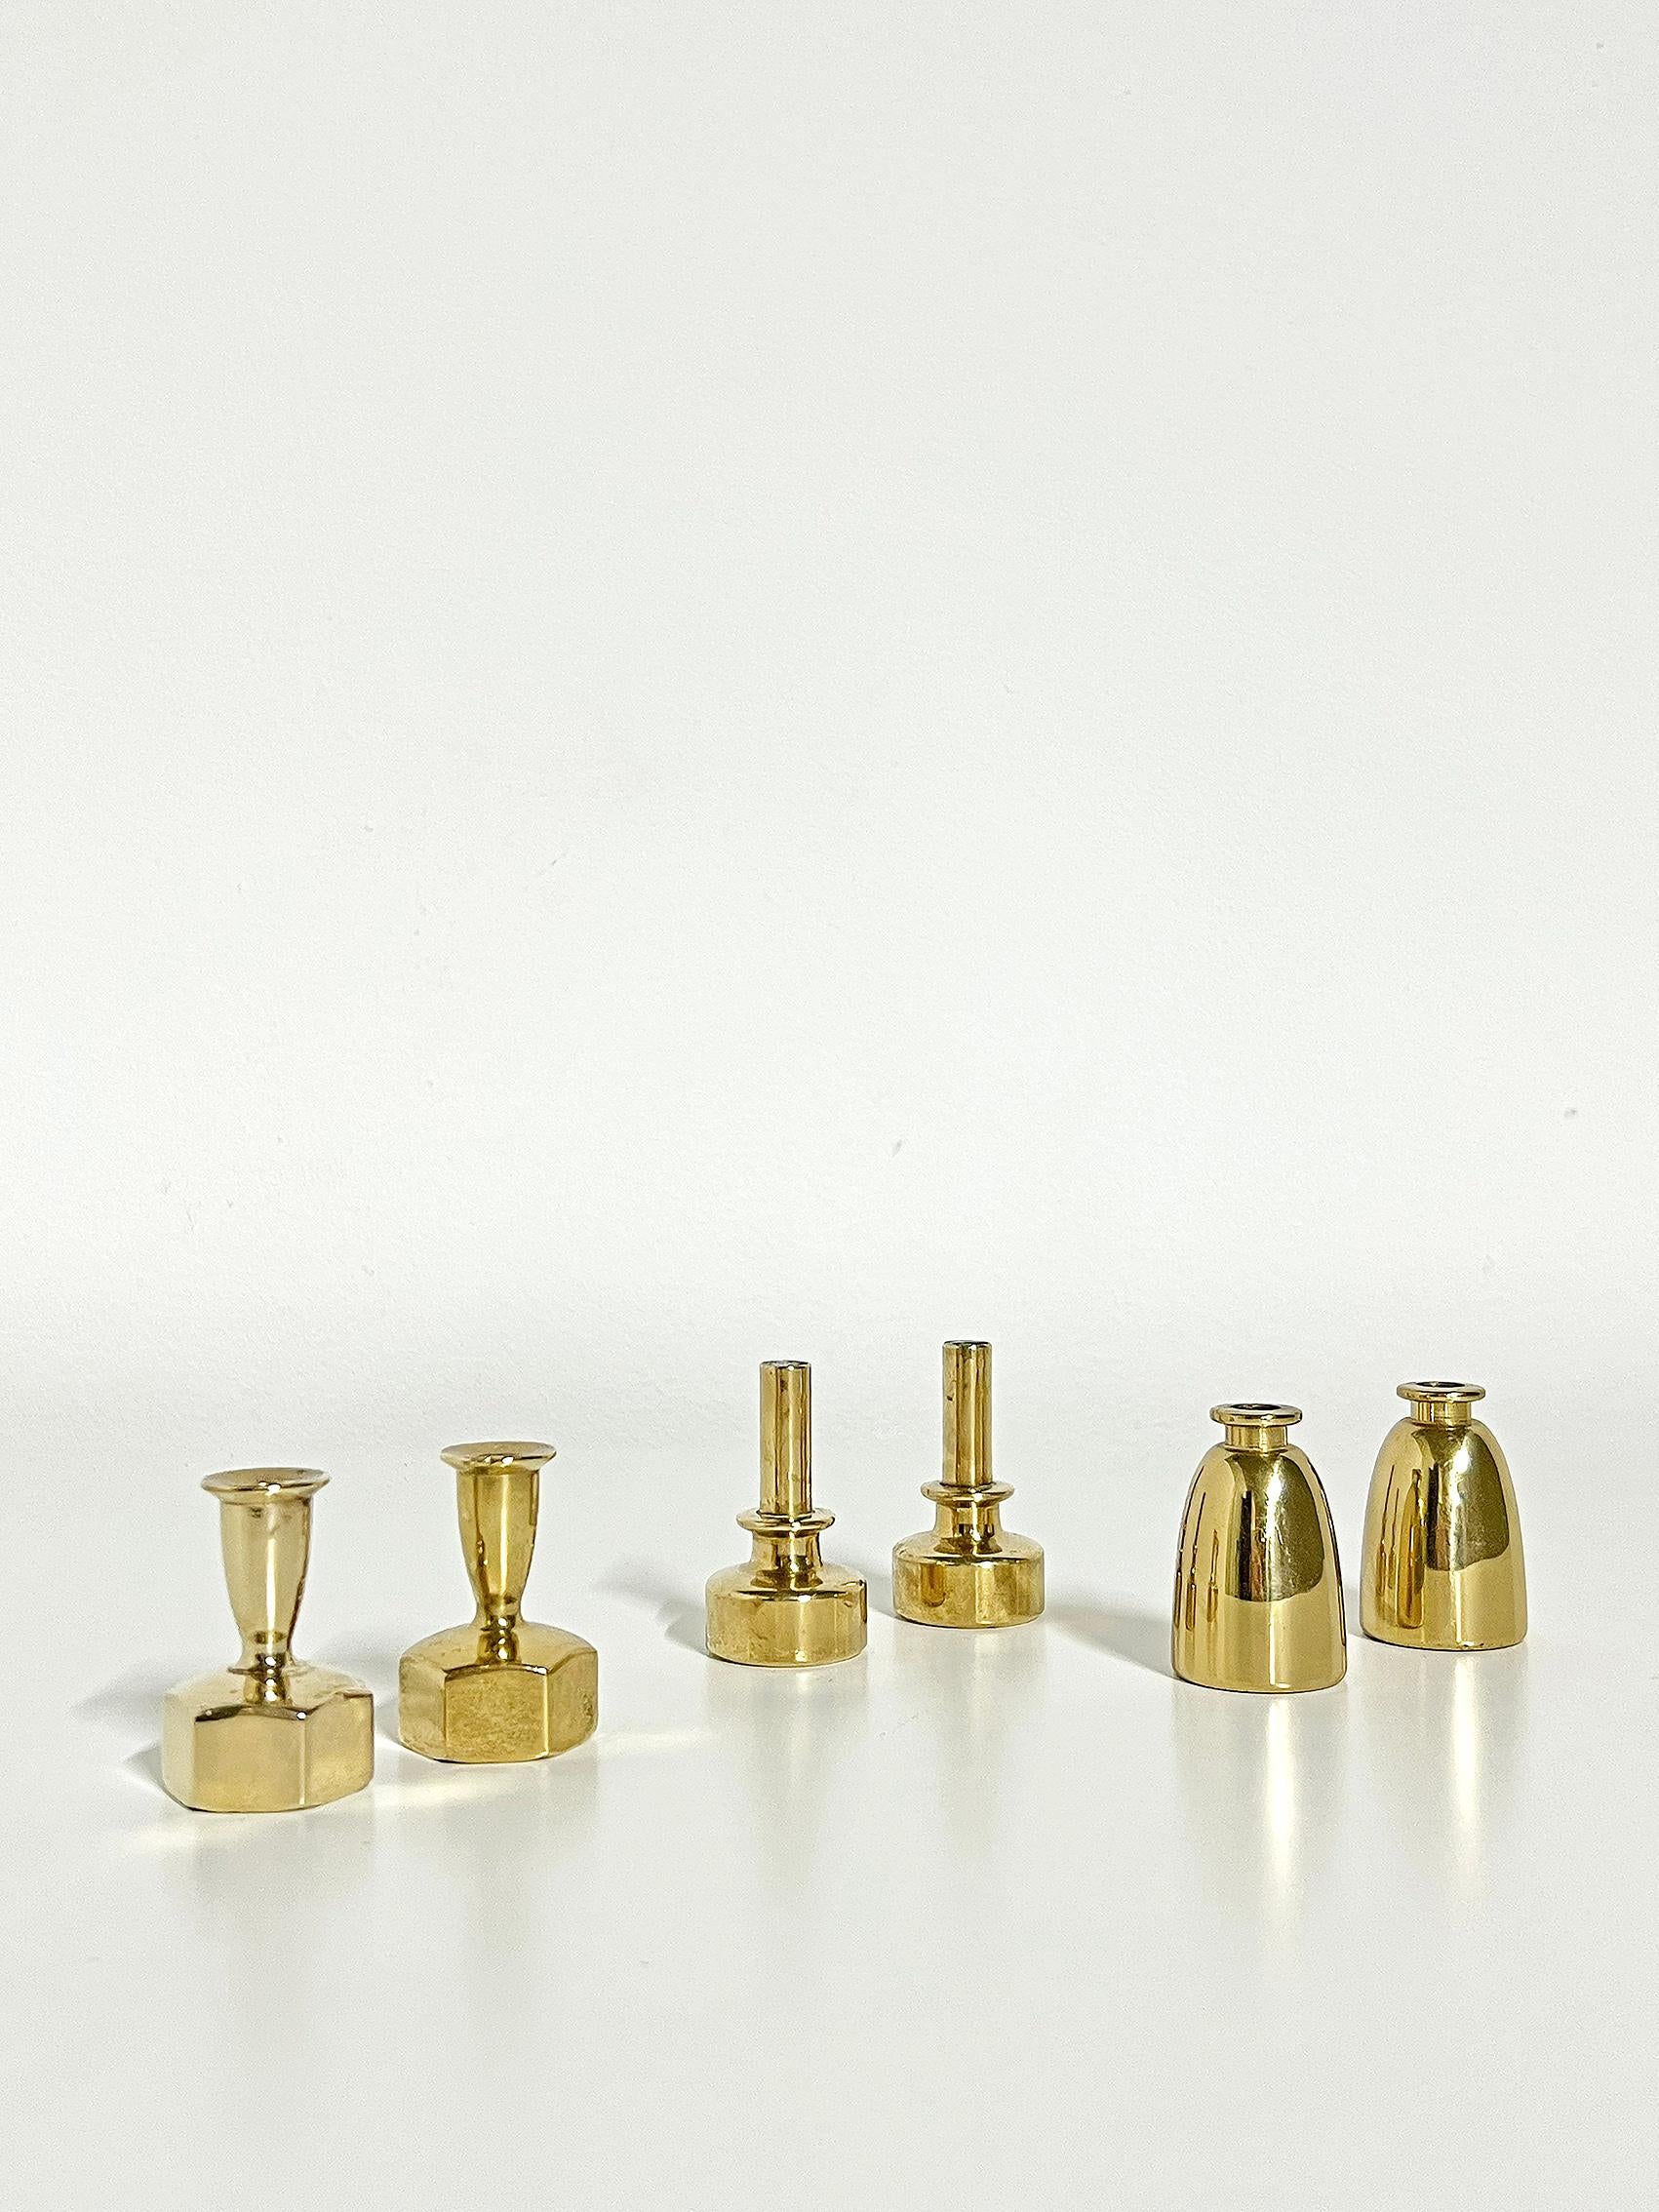 Scandinavian Modern, set of 6, candle holders in brass, Hans-Agne Jakobsson, ca 1960's.
Signed with makers mark. 

3 different measurements: 
Height: 5,2 cm, diameter: 2,8 cm. 
Height: 4,6 cm, diameter: 2,8 cm.
Height: 4,5 cm, width: 3 cm, depth: